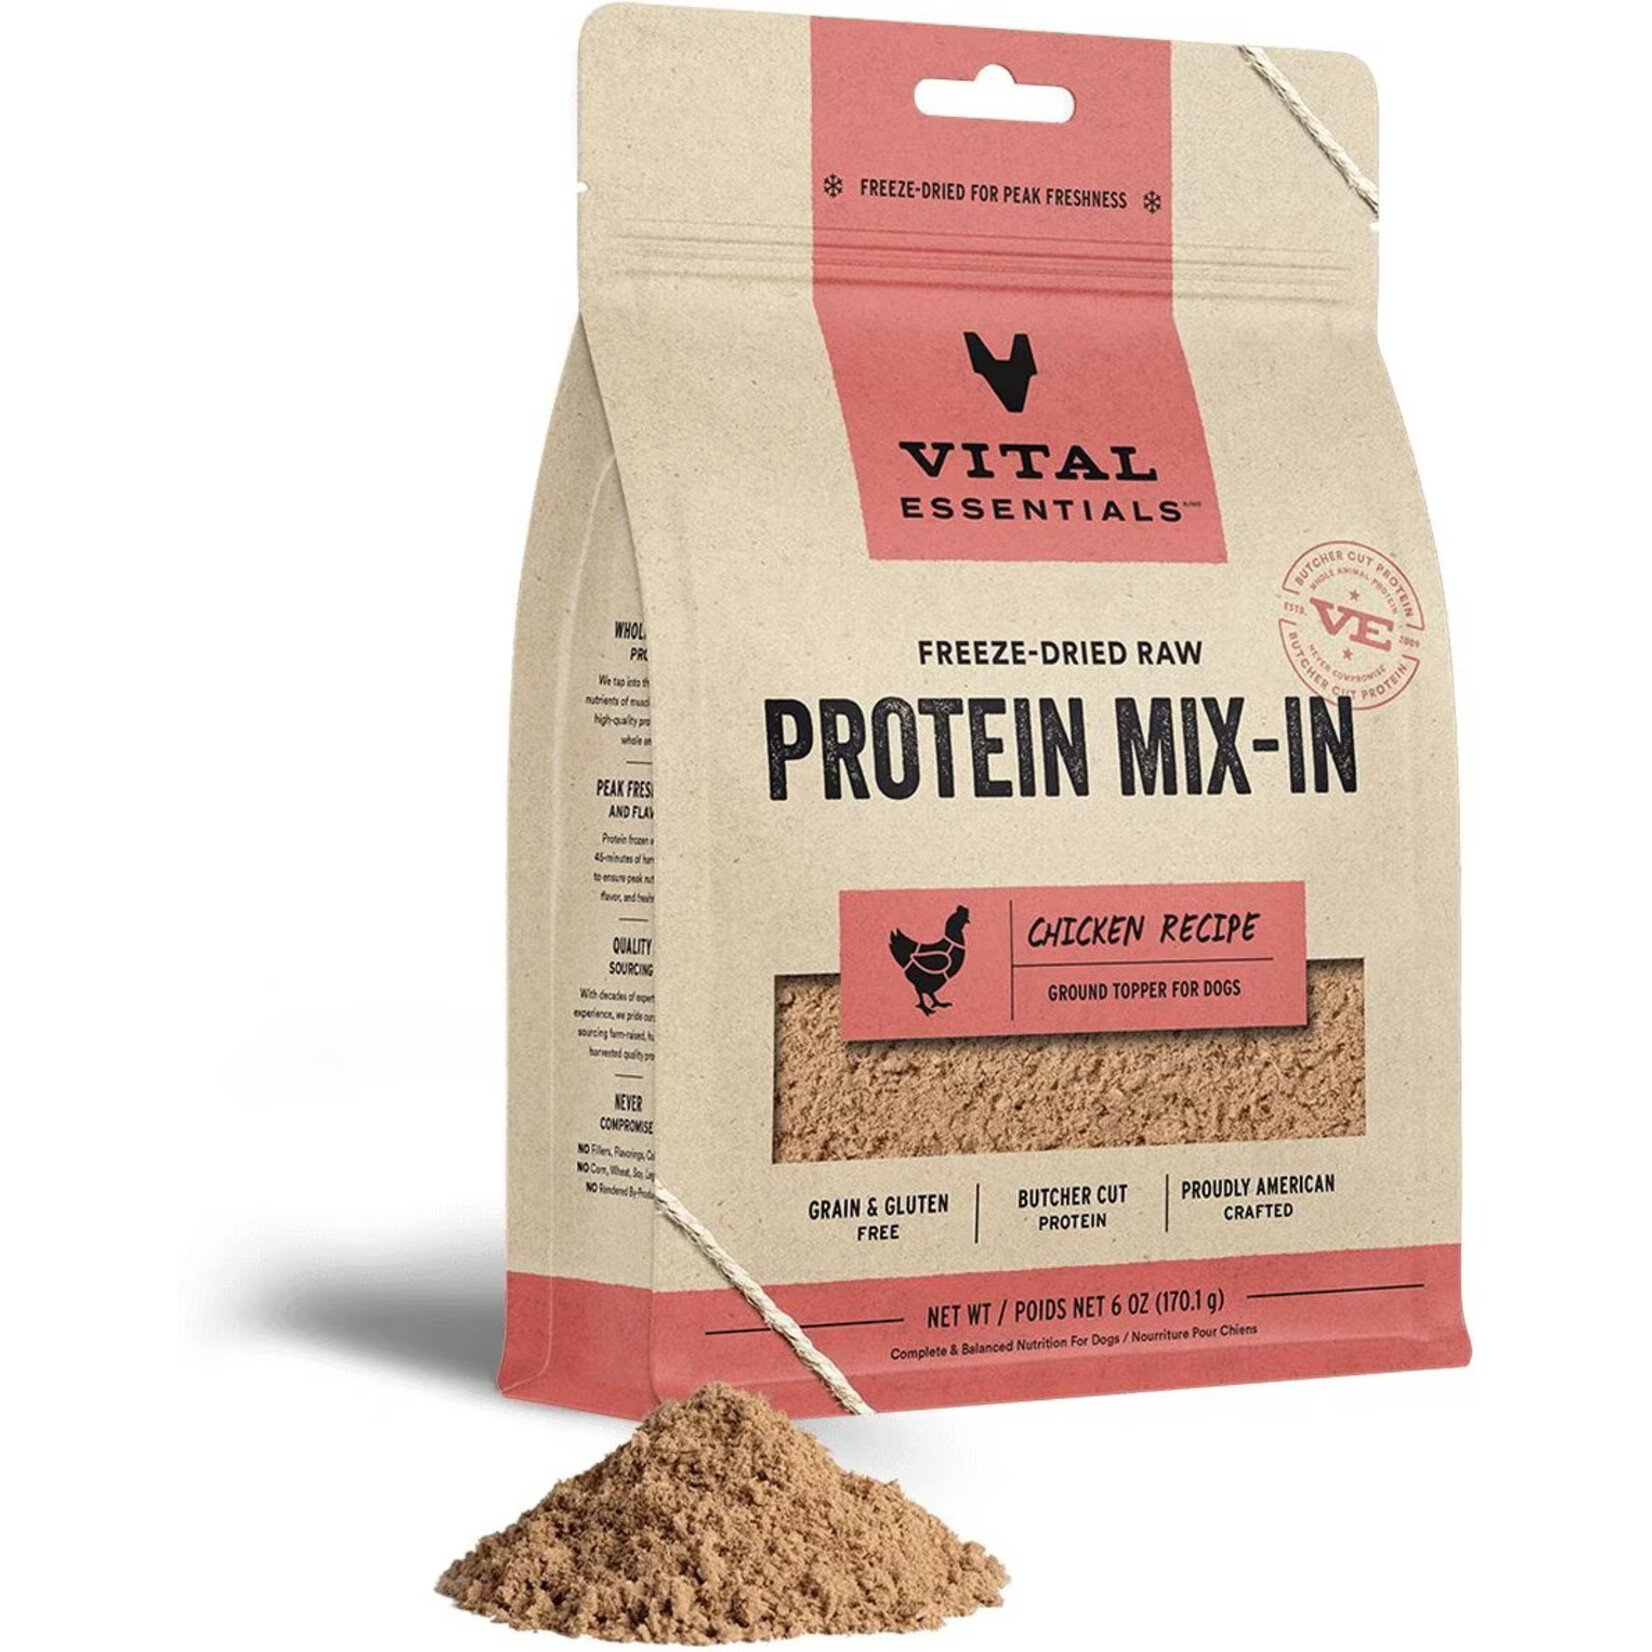 Vital Essentials Vital Essentials Freeze-Dried Raw Protein Mix-In - Chicken Recipe Ground Topper for Dogs